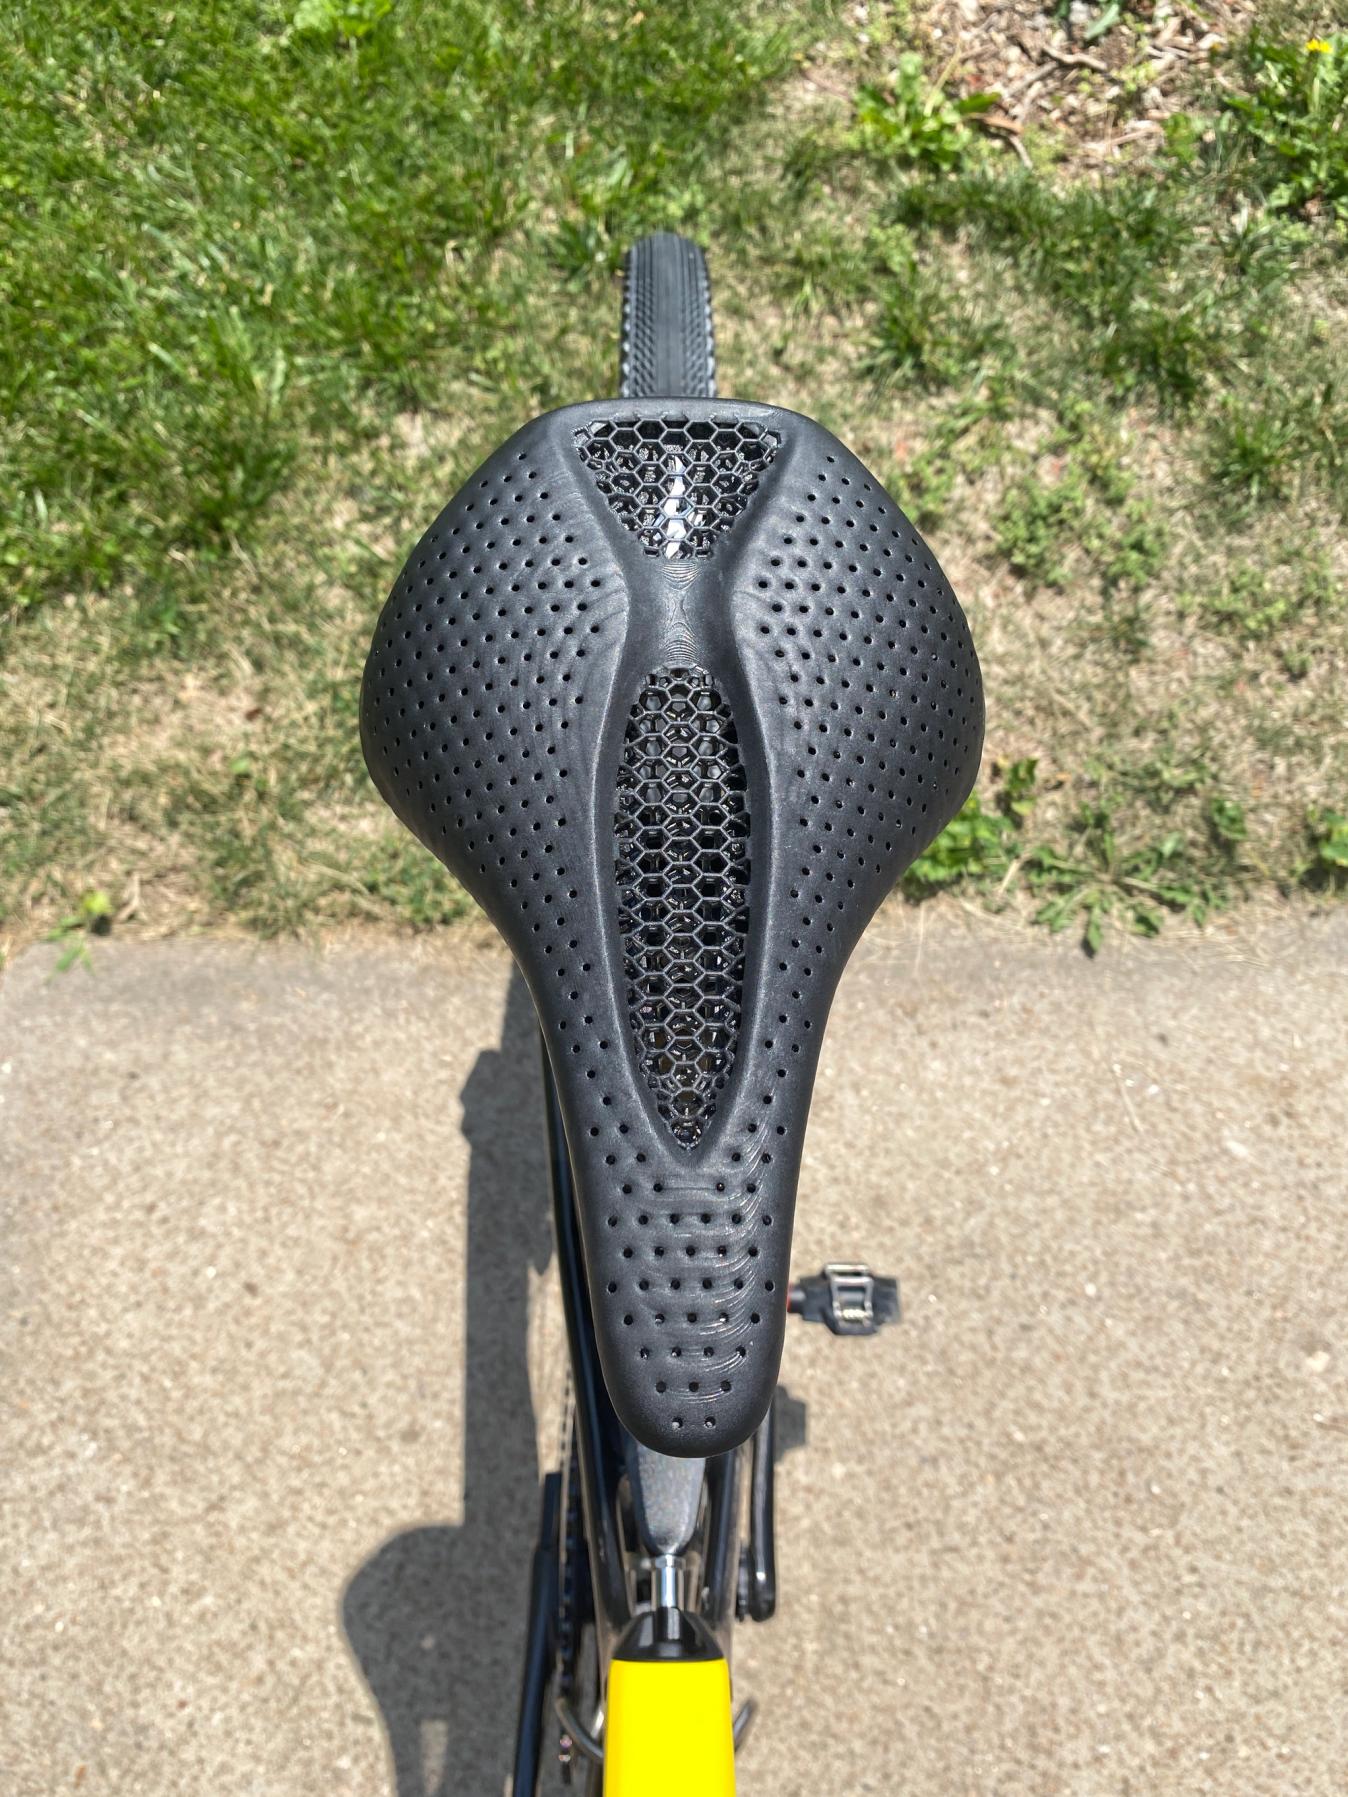 Saddles are important over 200 miles of rugged gravel racing. Sturm opted for a 143mm Specialized Power saddle with Mirror technology for her race